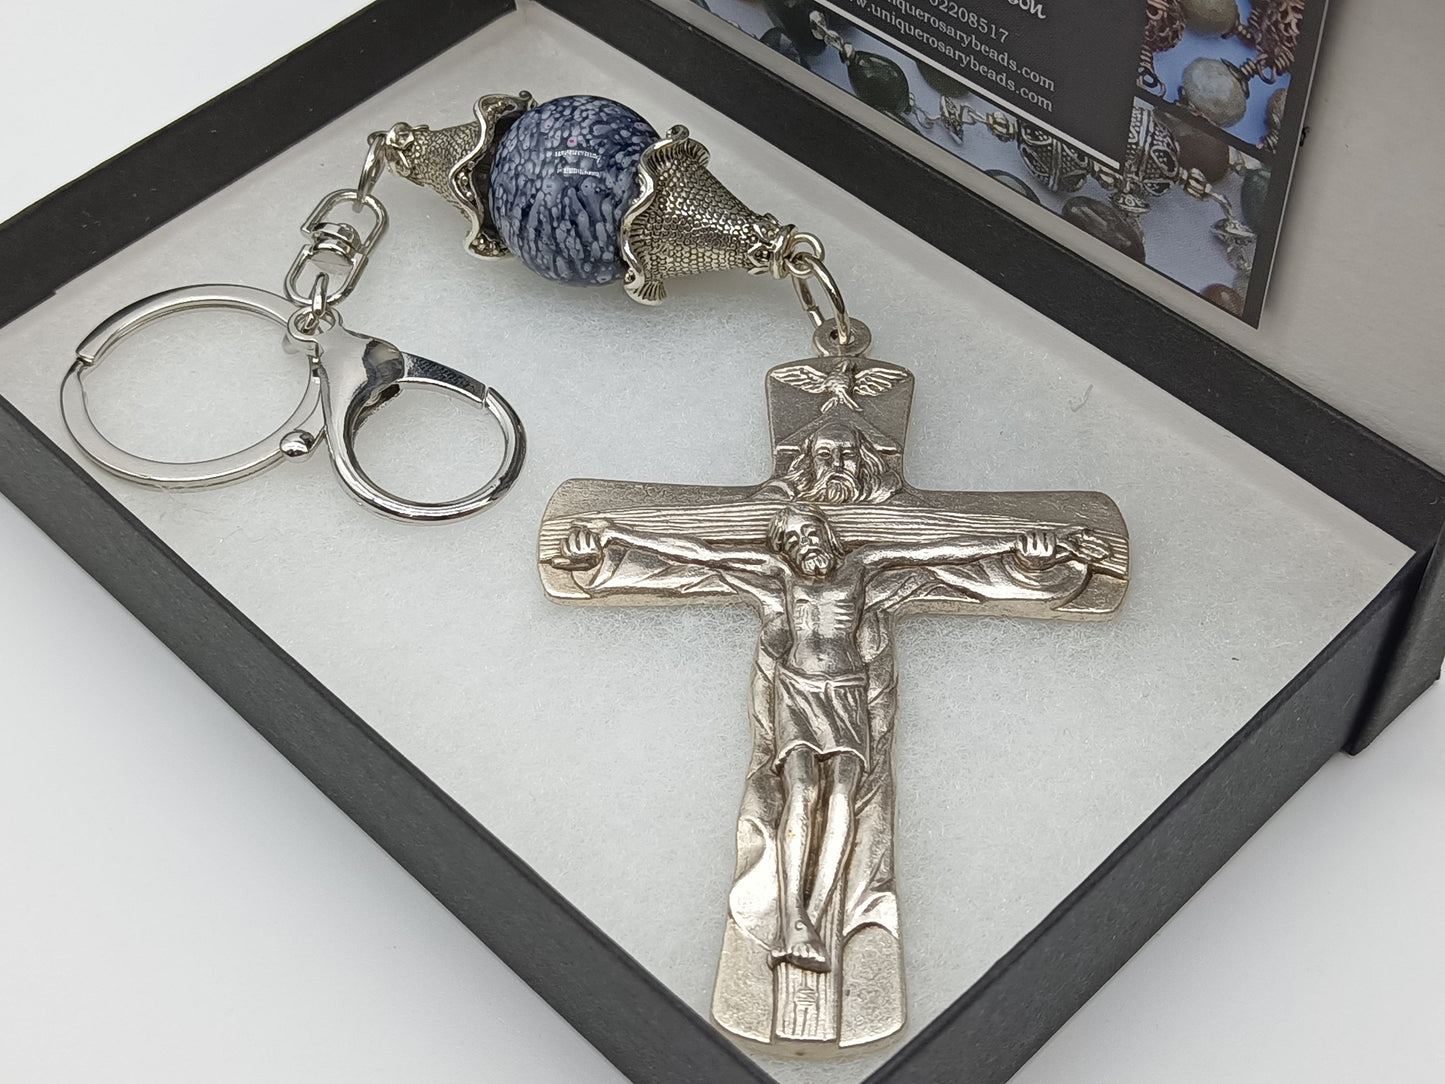 Holy Trinity Large silver Crucifix, Large Wall Crucifix Hanging key fob, Silver Hanging Crucifix prayer beads, Vatican City Crucifix.